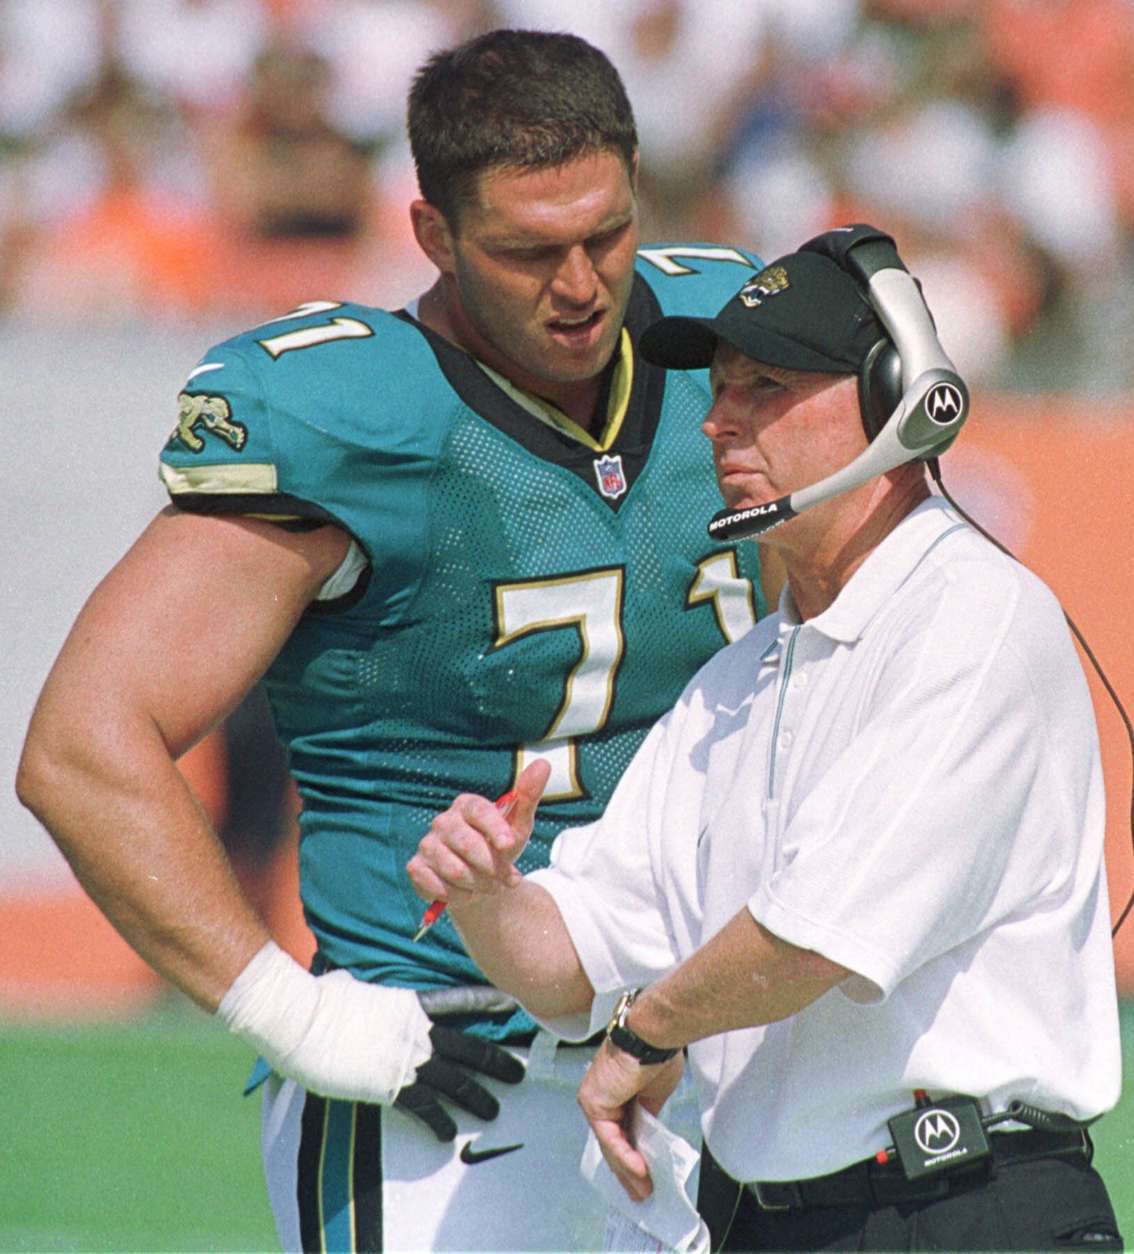 Jacksonville Jaguars tackle Tony Boselli (71) talks with coach Tom Coughlin on the sidelines during the Jaguars' 27-7 win over the Cleveland Browns in Cleveland, Sunday, Sept. 3, 2000. (AP Photo/Phil Long)